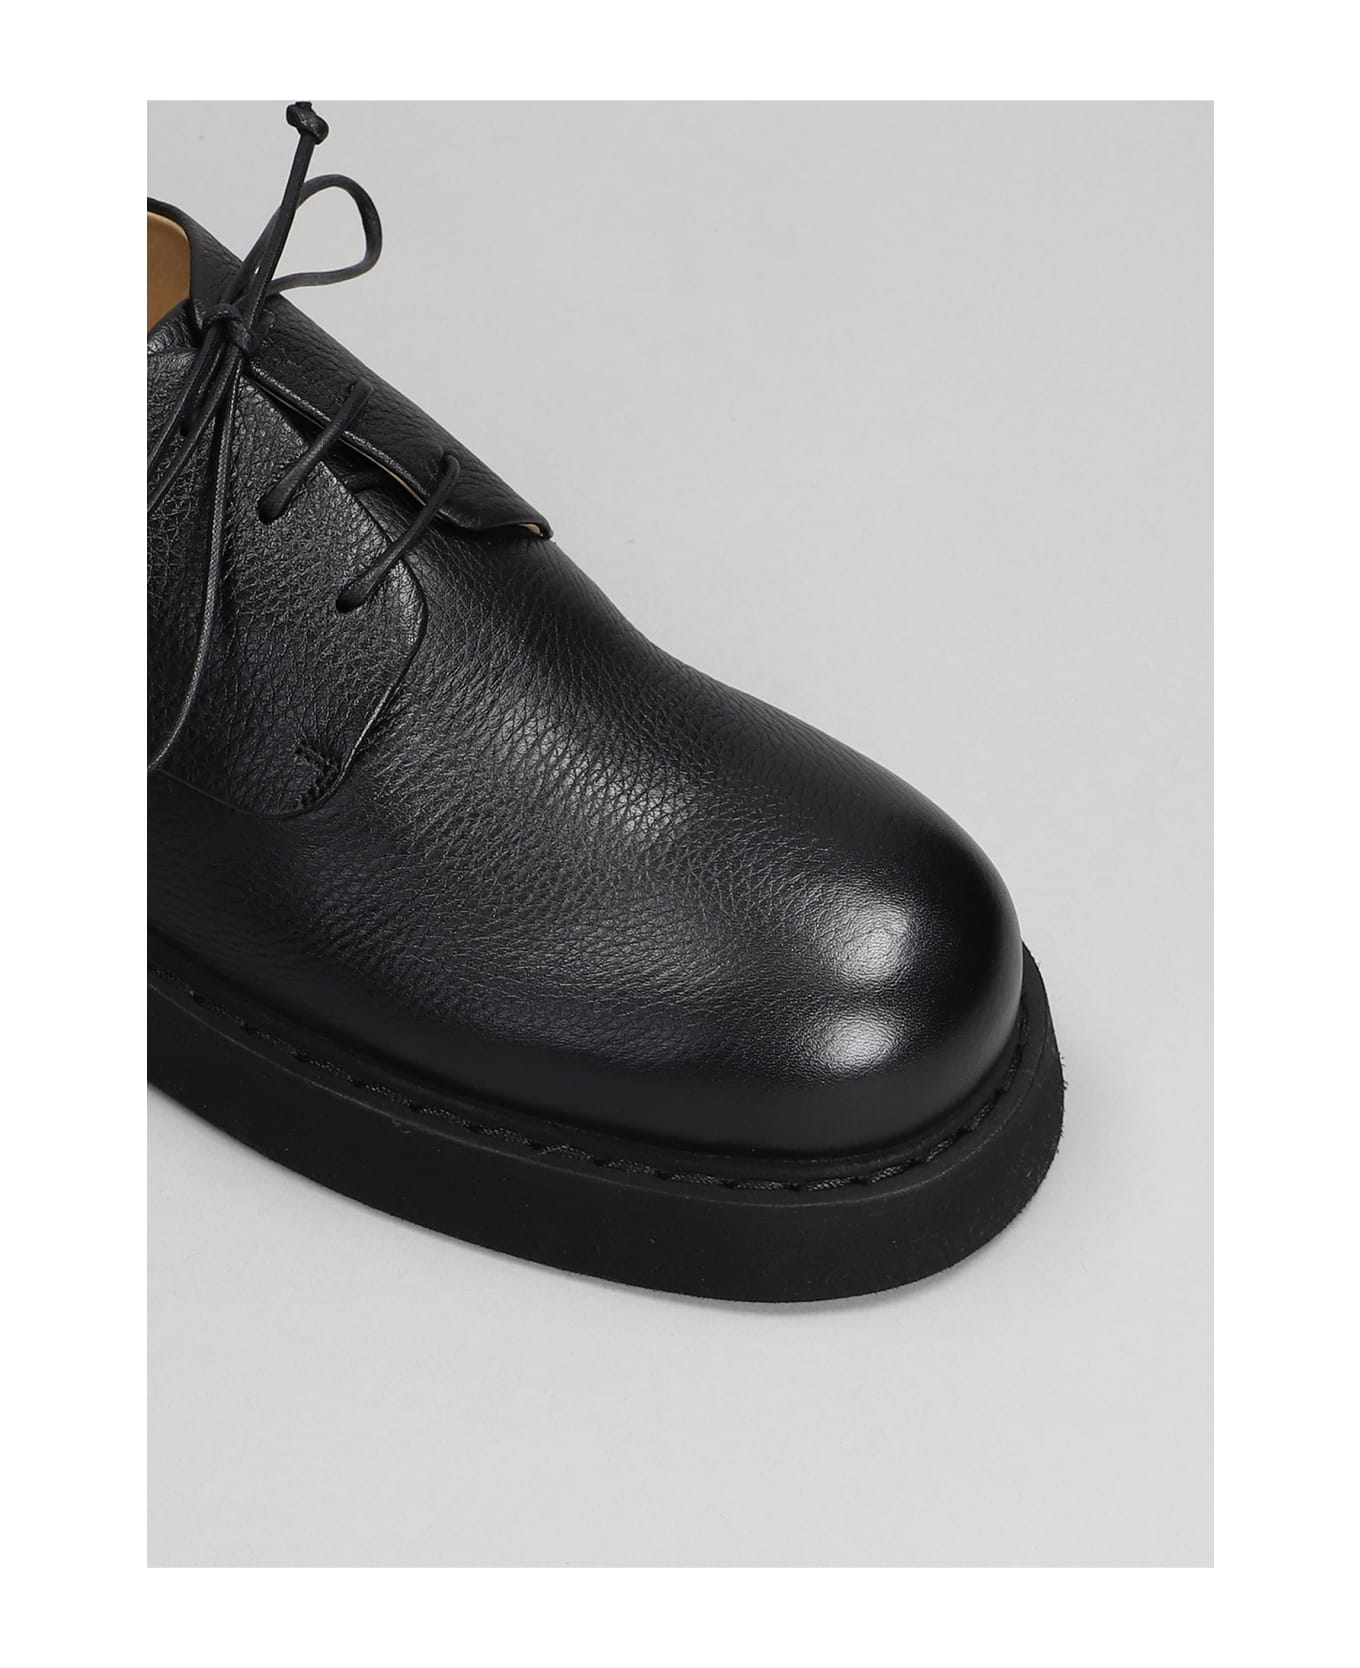 Marsell Lace Up Ascot Shoes In Black Leather - black